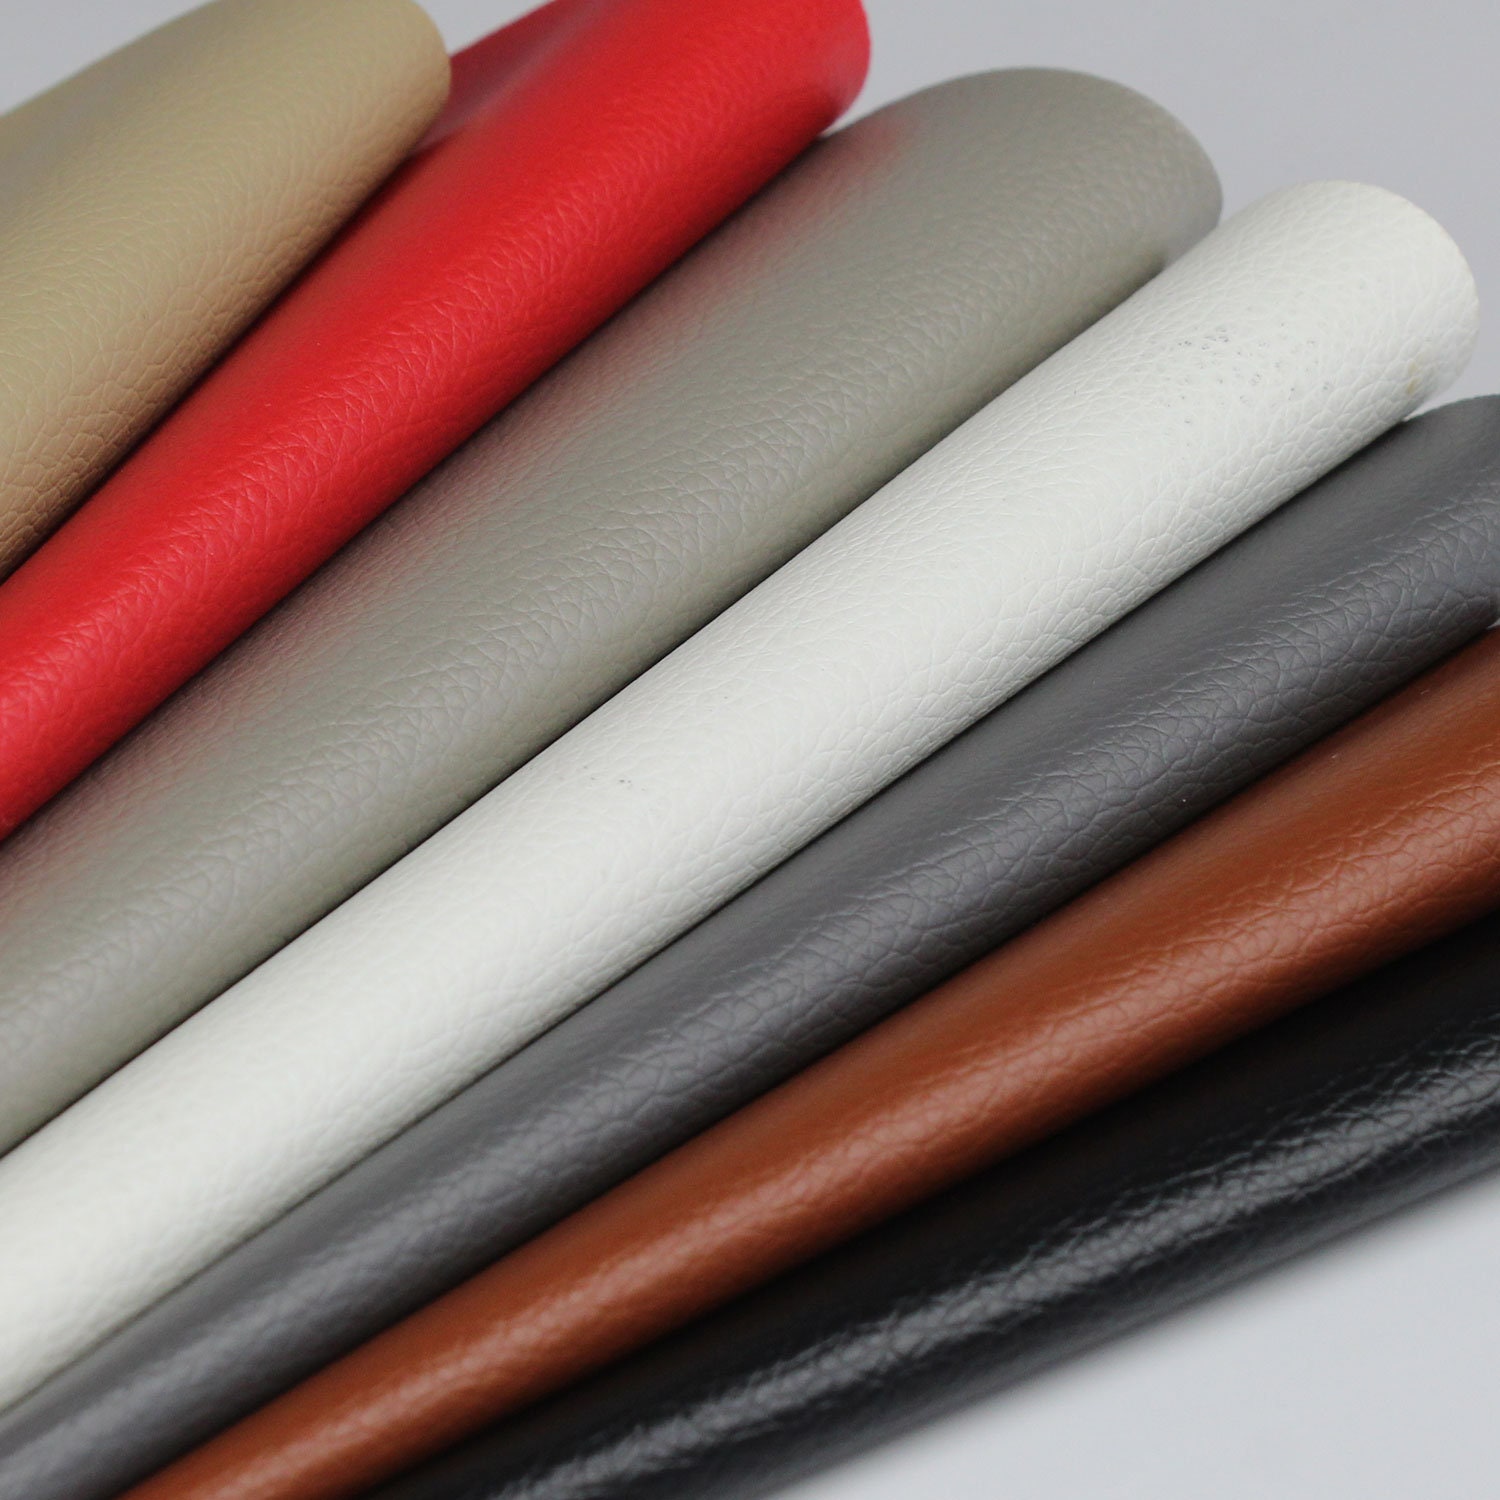 Self-Adhesive Leather Fabric, Artificial Leather, Faux Leather